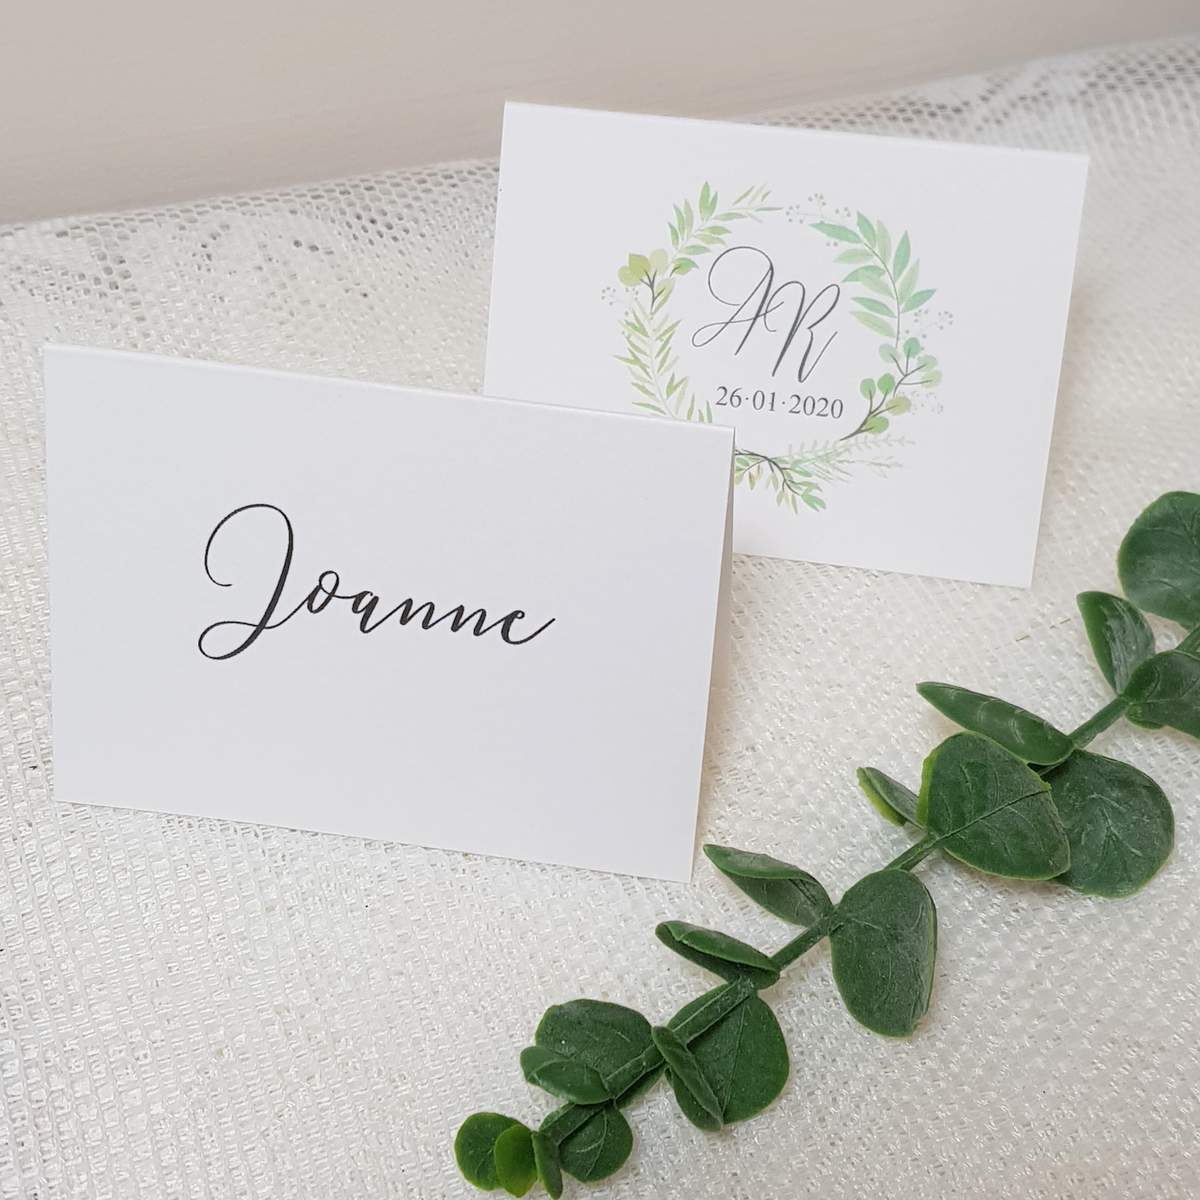 white place cards with a greenery wreath design